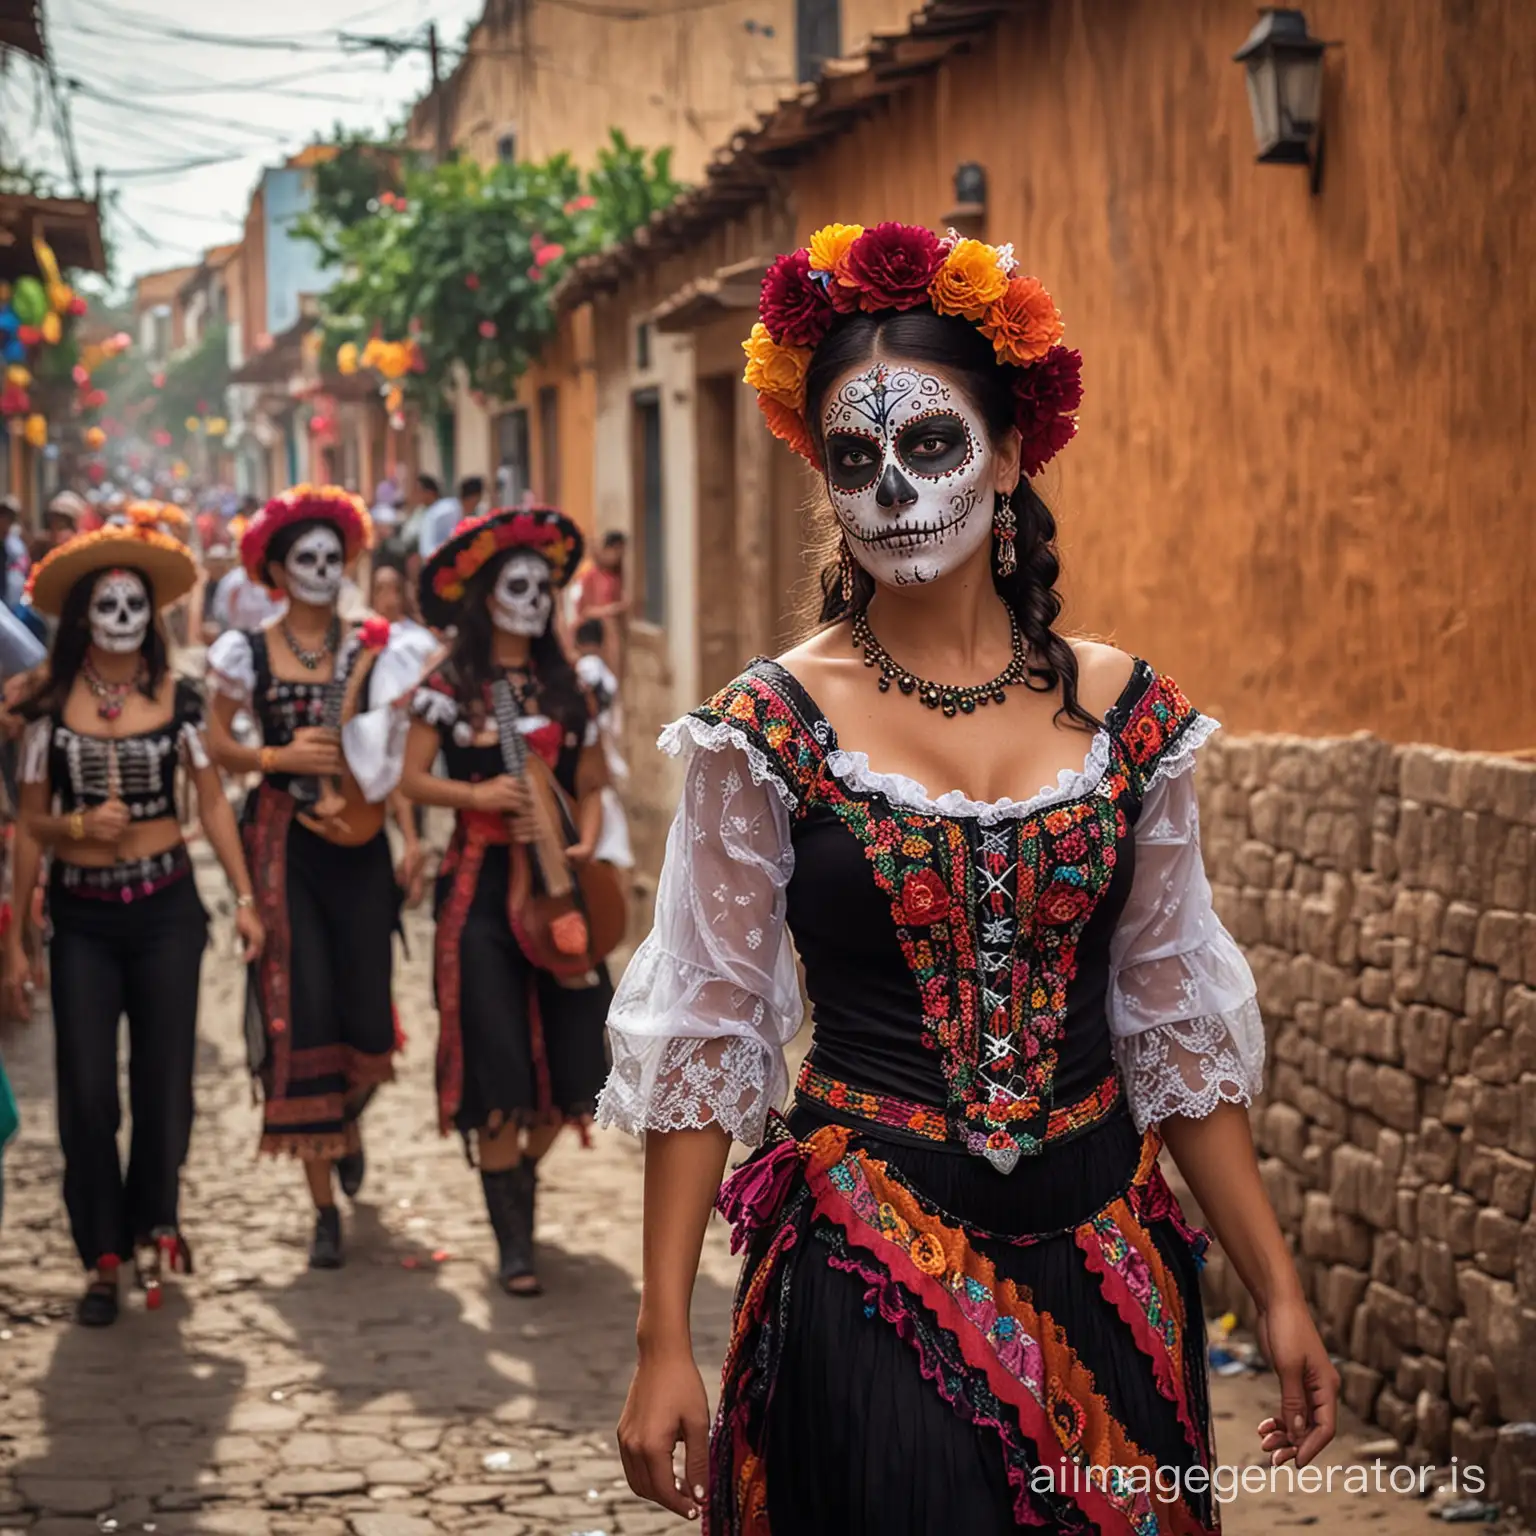 Vibrant-Day-of-the-Dead-Celebration-in-Mexican-Village-Alley